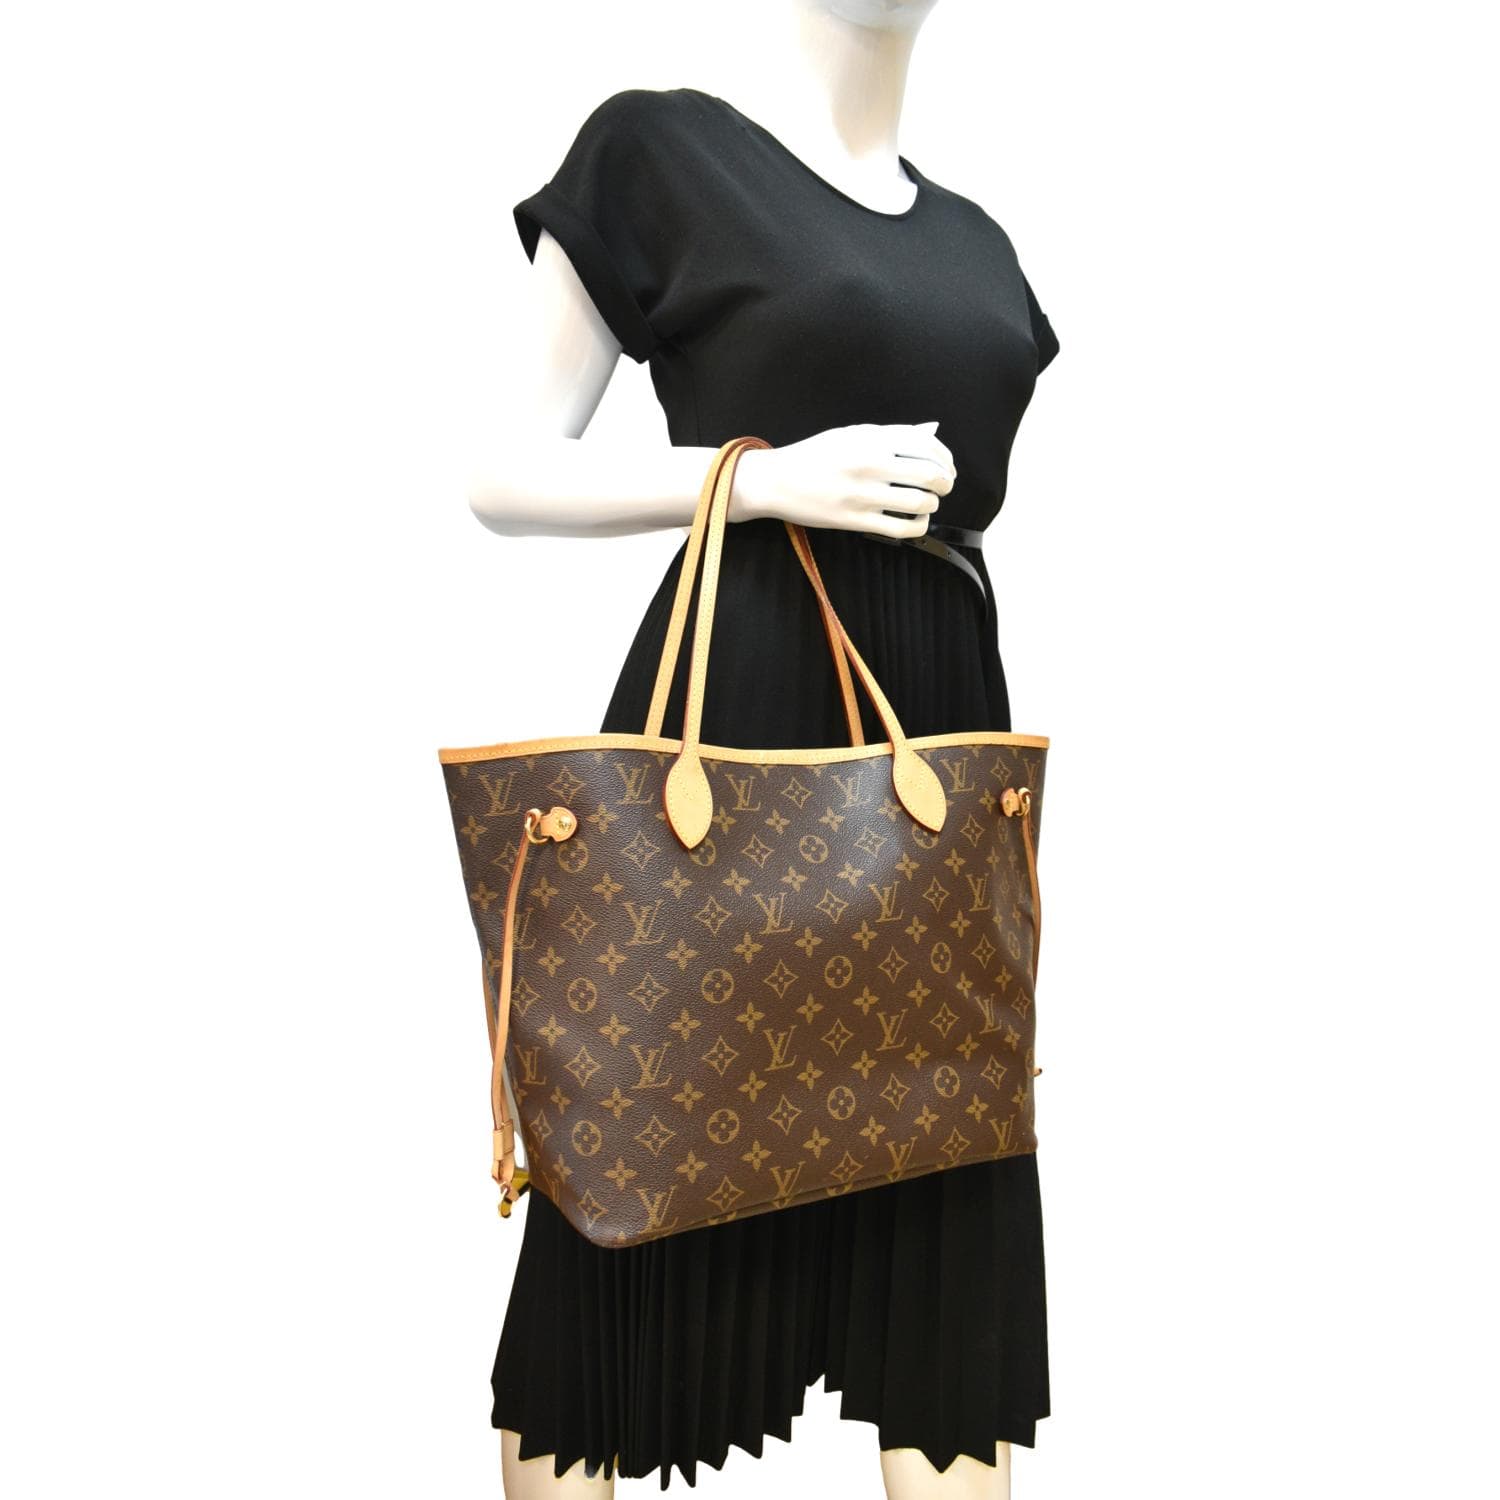 Vuitton - ep_vintage luxury Store - Over at Louis Vuitton - Monogram -  Louis - Neverfull - Bag - Brown - MM - M40156 – dct - Tote